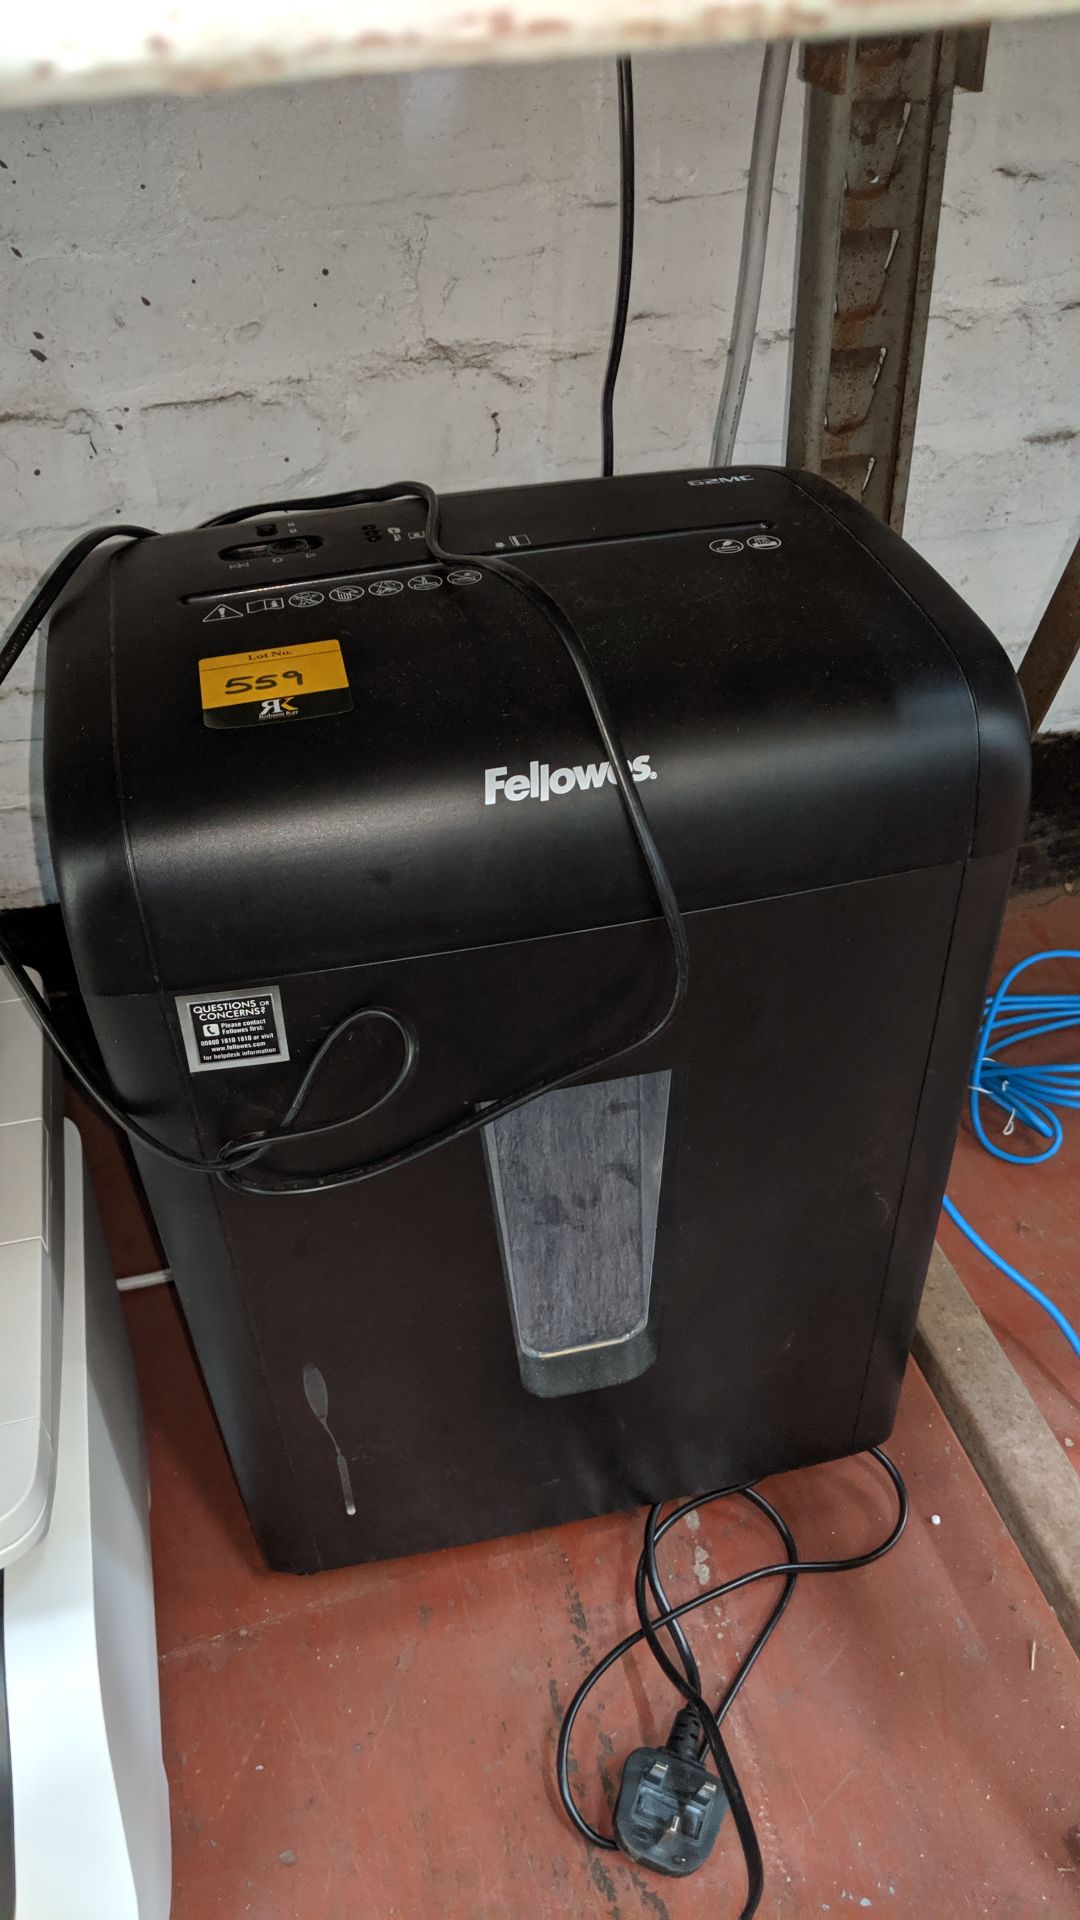 Fellowes 62MC shredder. This is one of a large number of lots used/owned by One To One (North